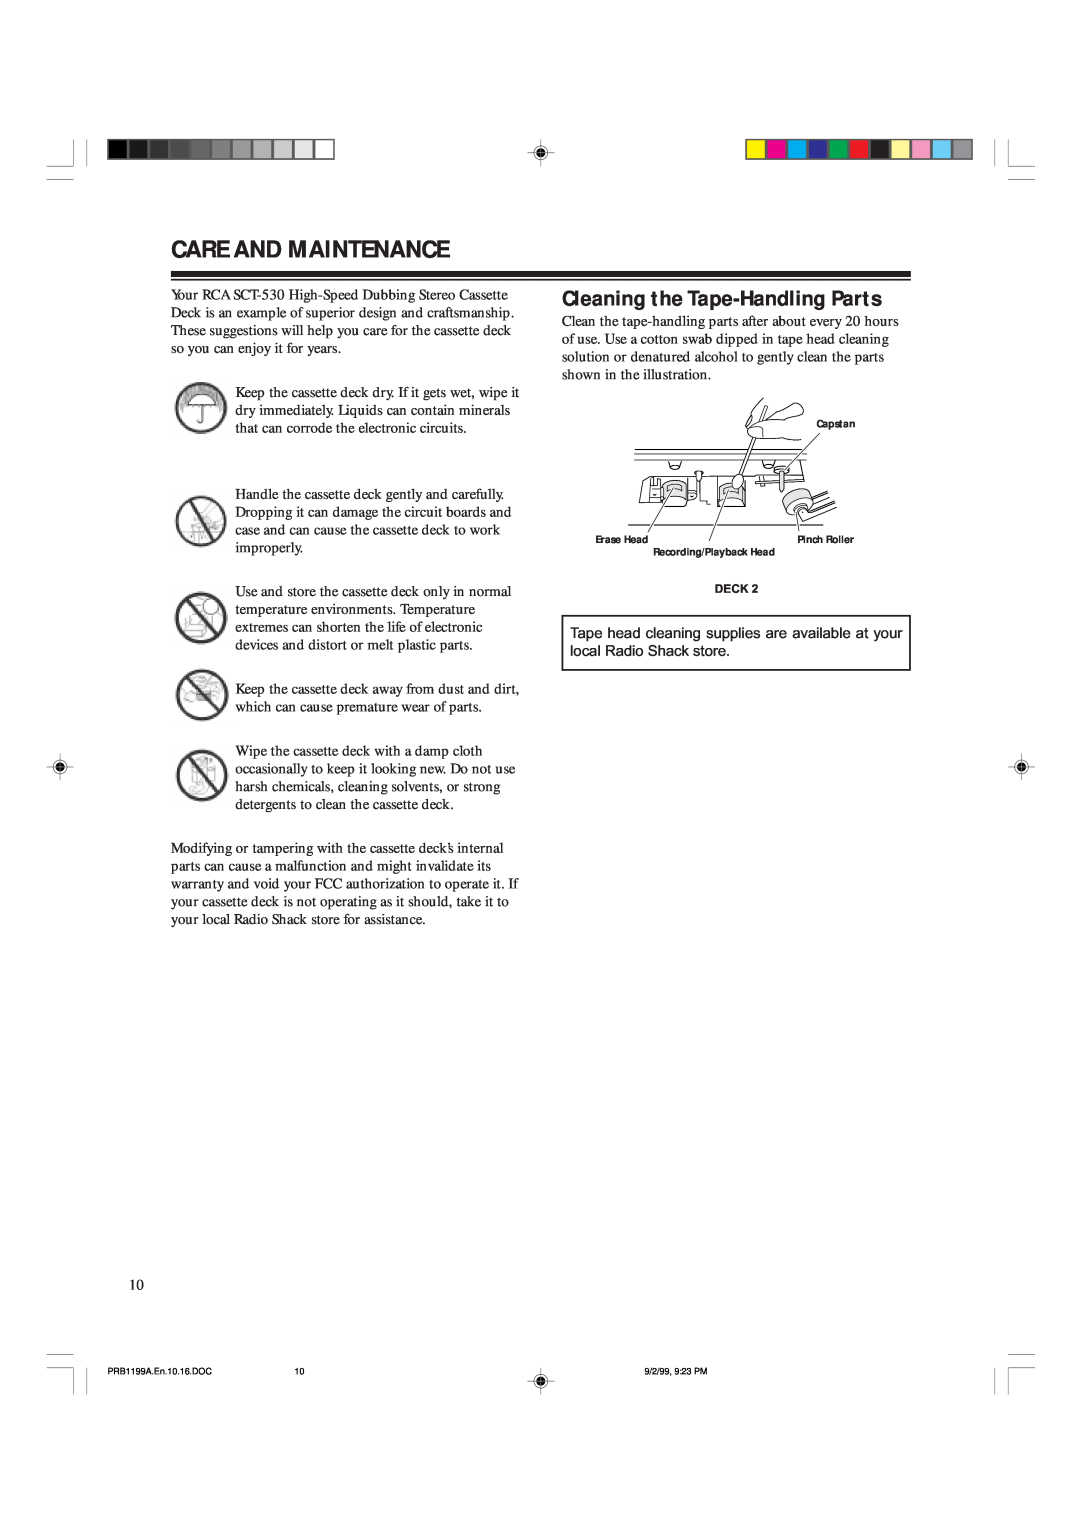 RCA SCT-530 owner manual Care And Maintenance, Cleaning the Tape-HandlingParts 